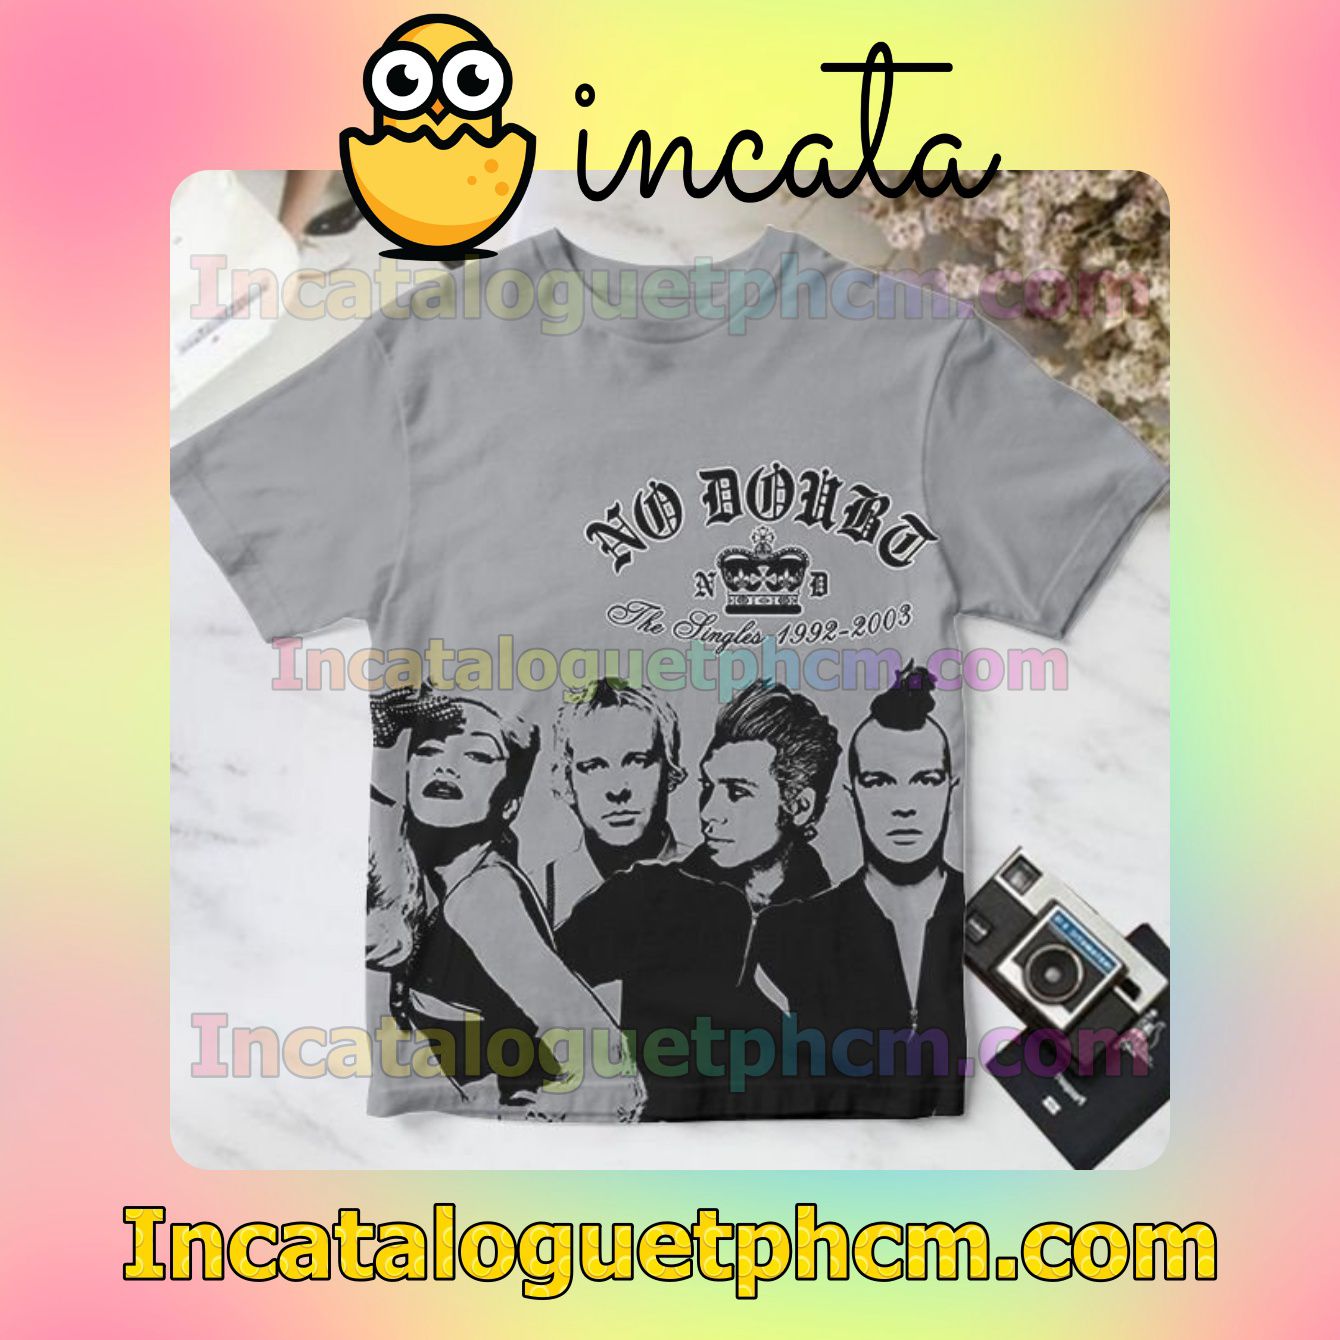 No Doubt The Singles 1992-2003 Album Cover Personalized Shirt